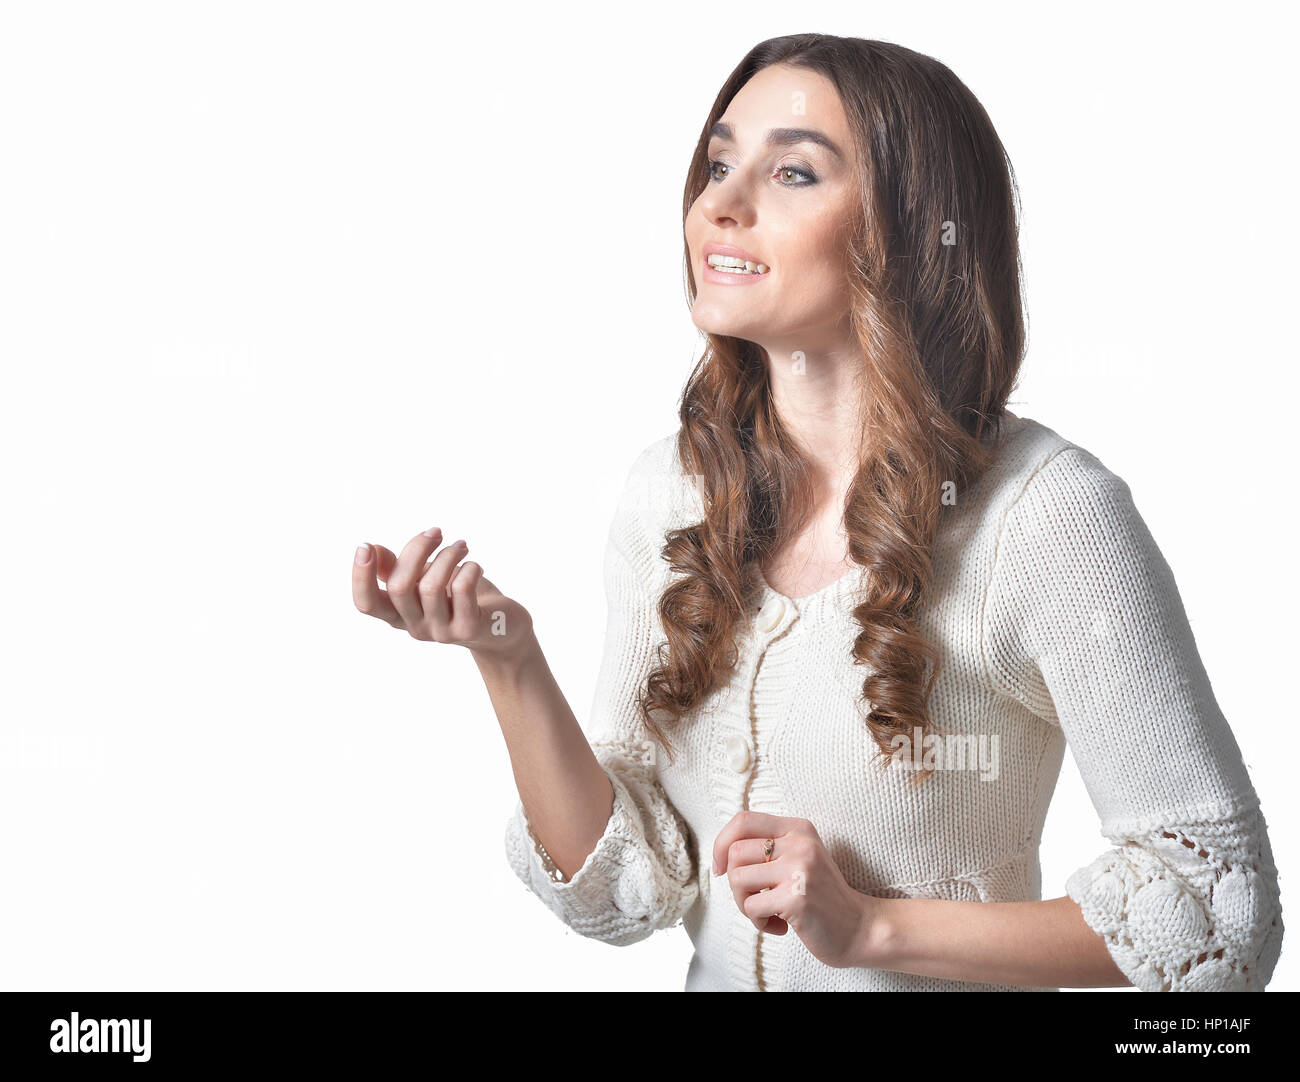 young woman gesticulating Stock Photo